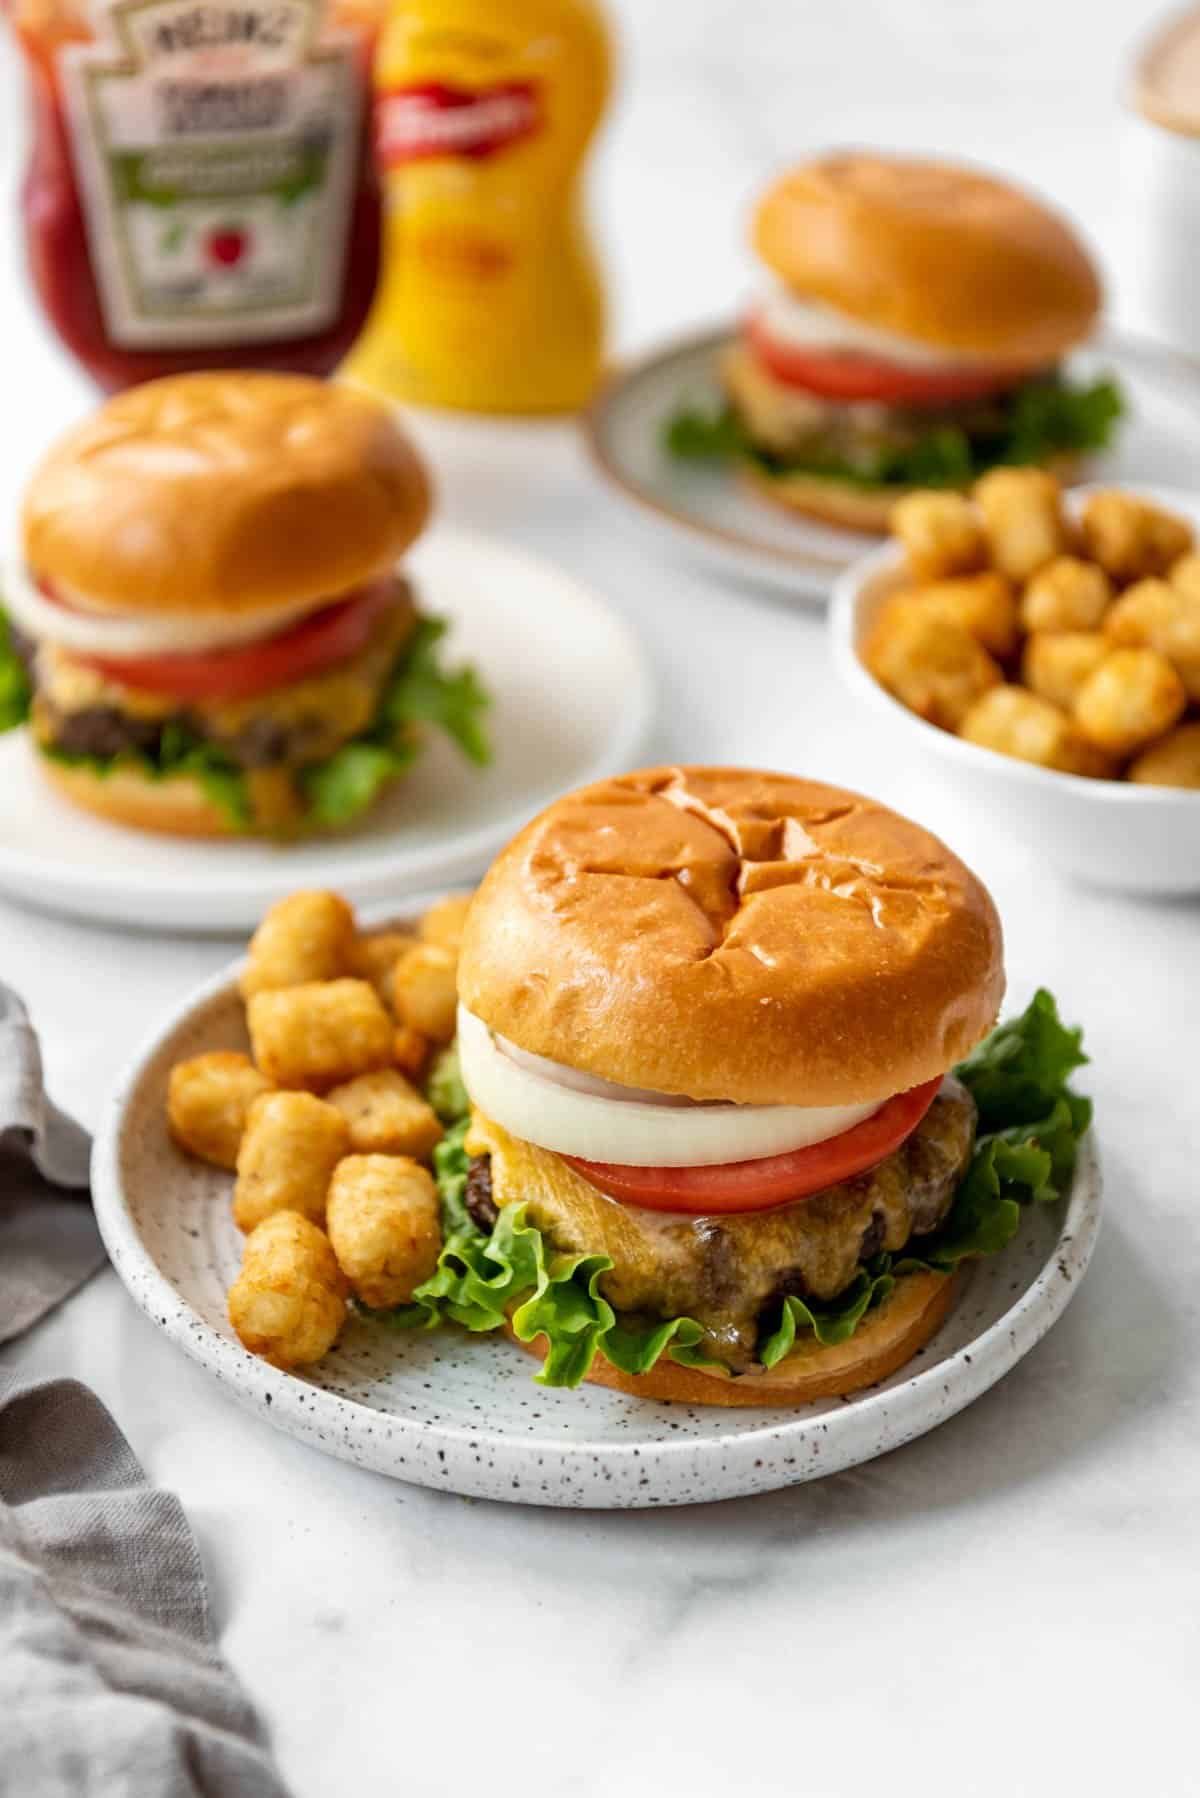 Hamburgers made in the air fryer on plates with tater tots next to jars of ketchup and mustard.